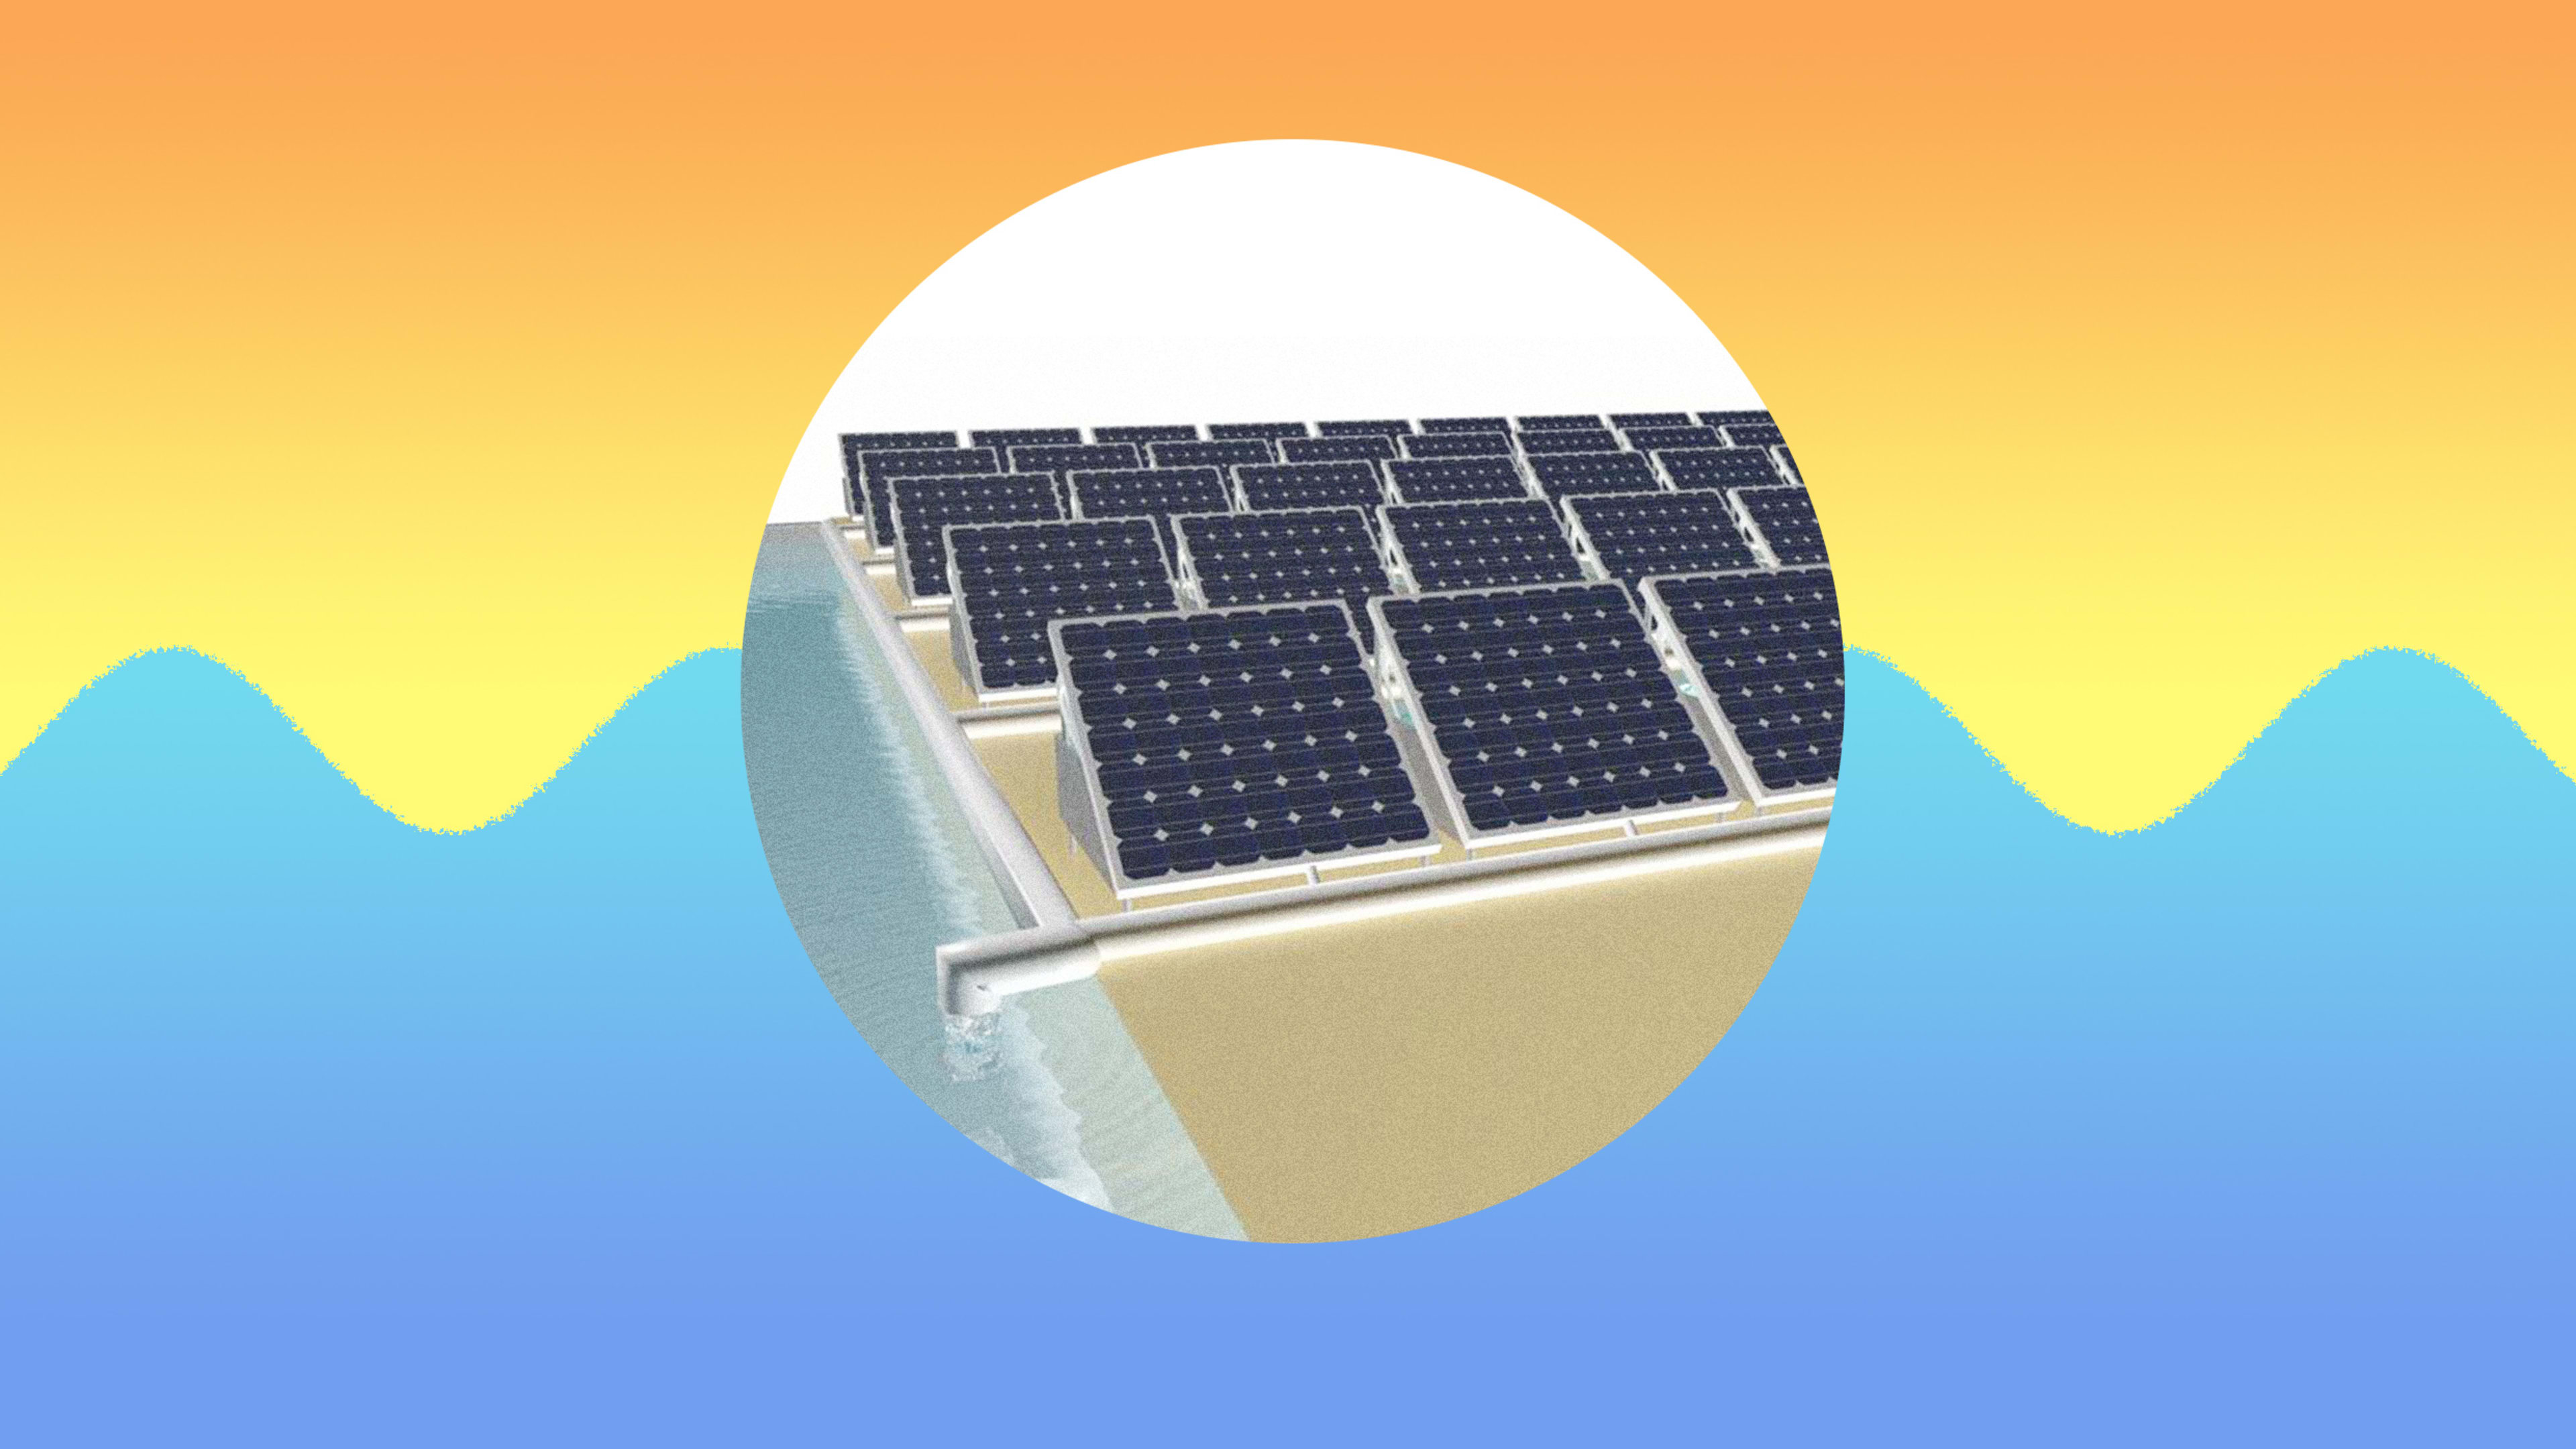 These solar panels don’t just generate power—they produce drinking water